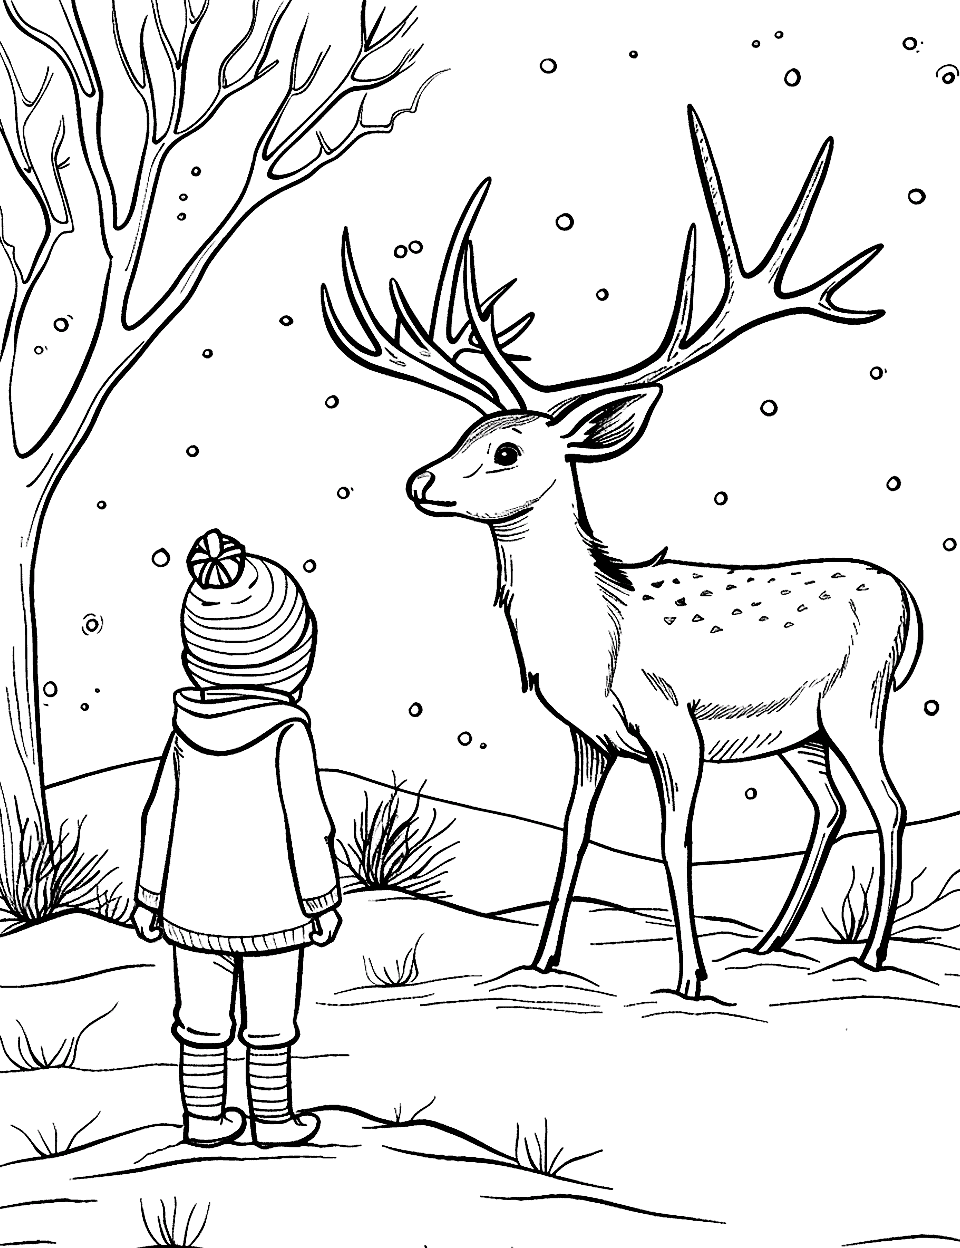 Boy on a Winter Deer Adventure Coloring Page - A boy warmly dressed, watching a deer in a snowy winter landscape.